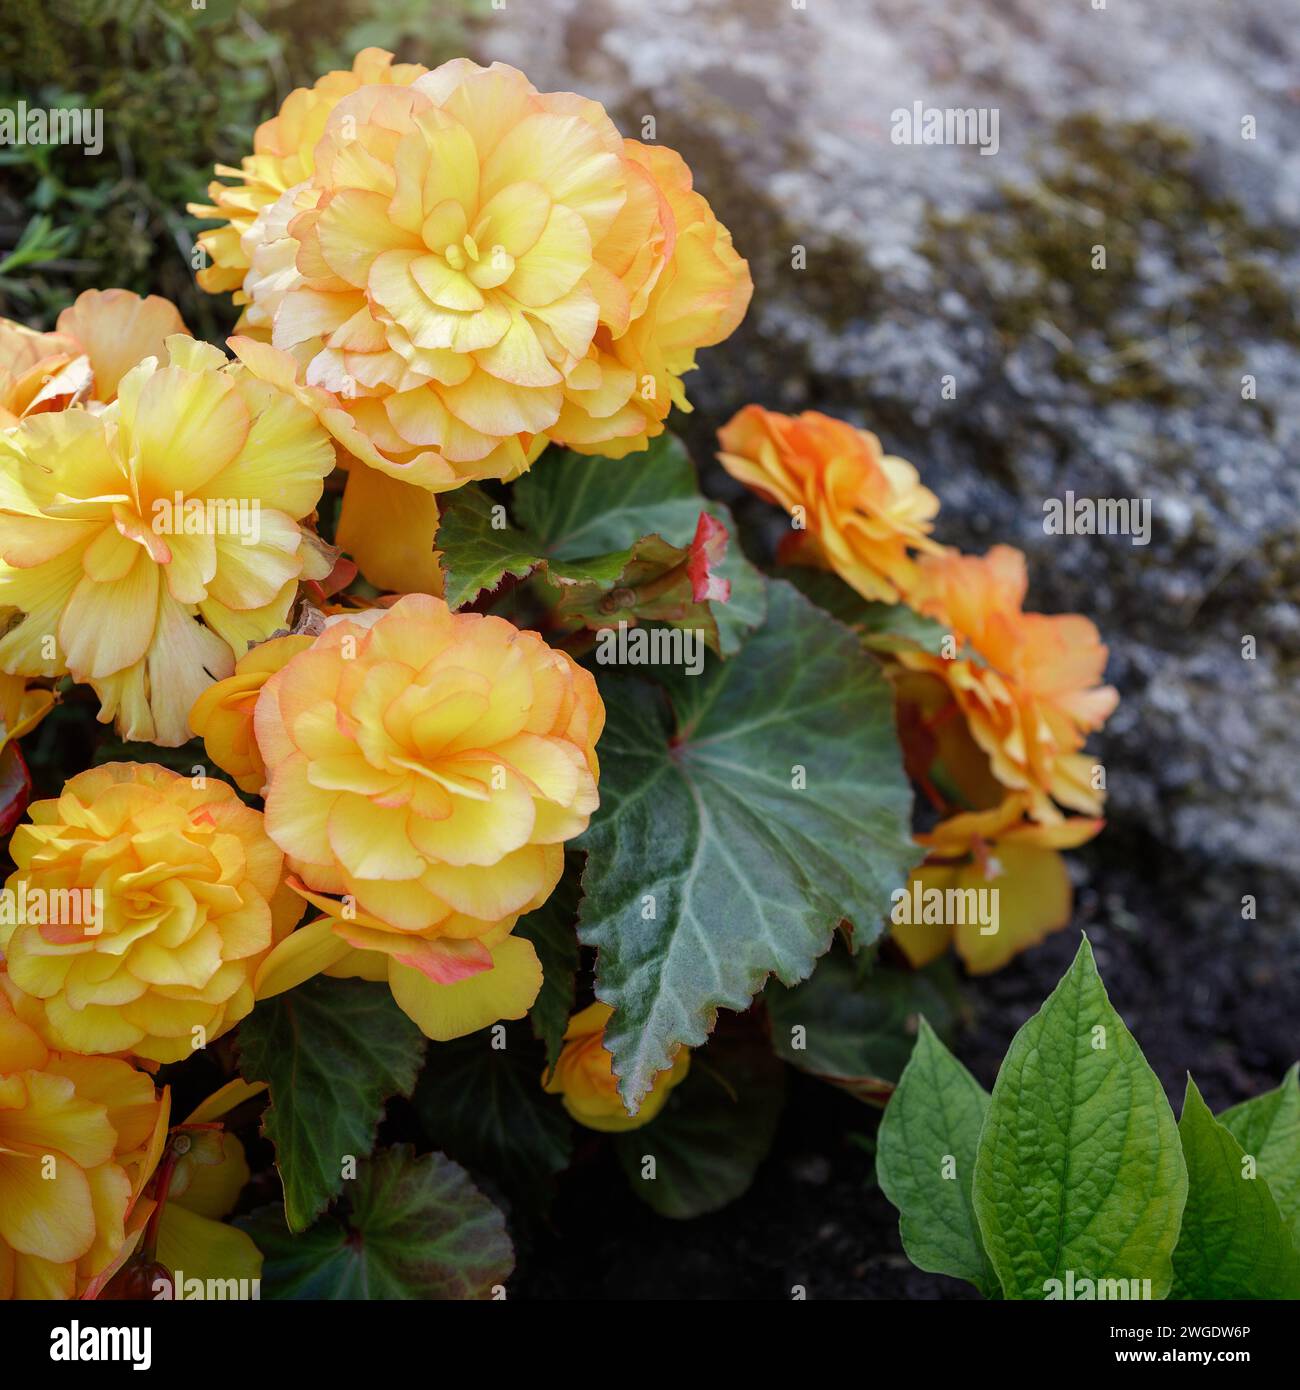 Tuberous-rooted begonia tuberosa yellow flowers with green leaves. Square photo. Stock Photo